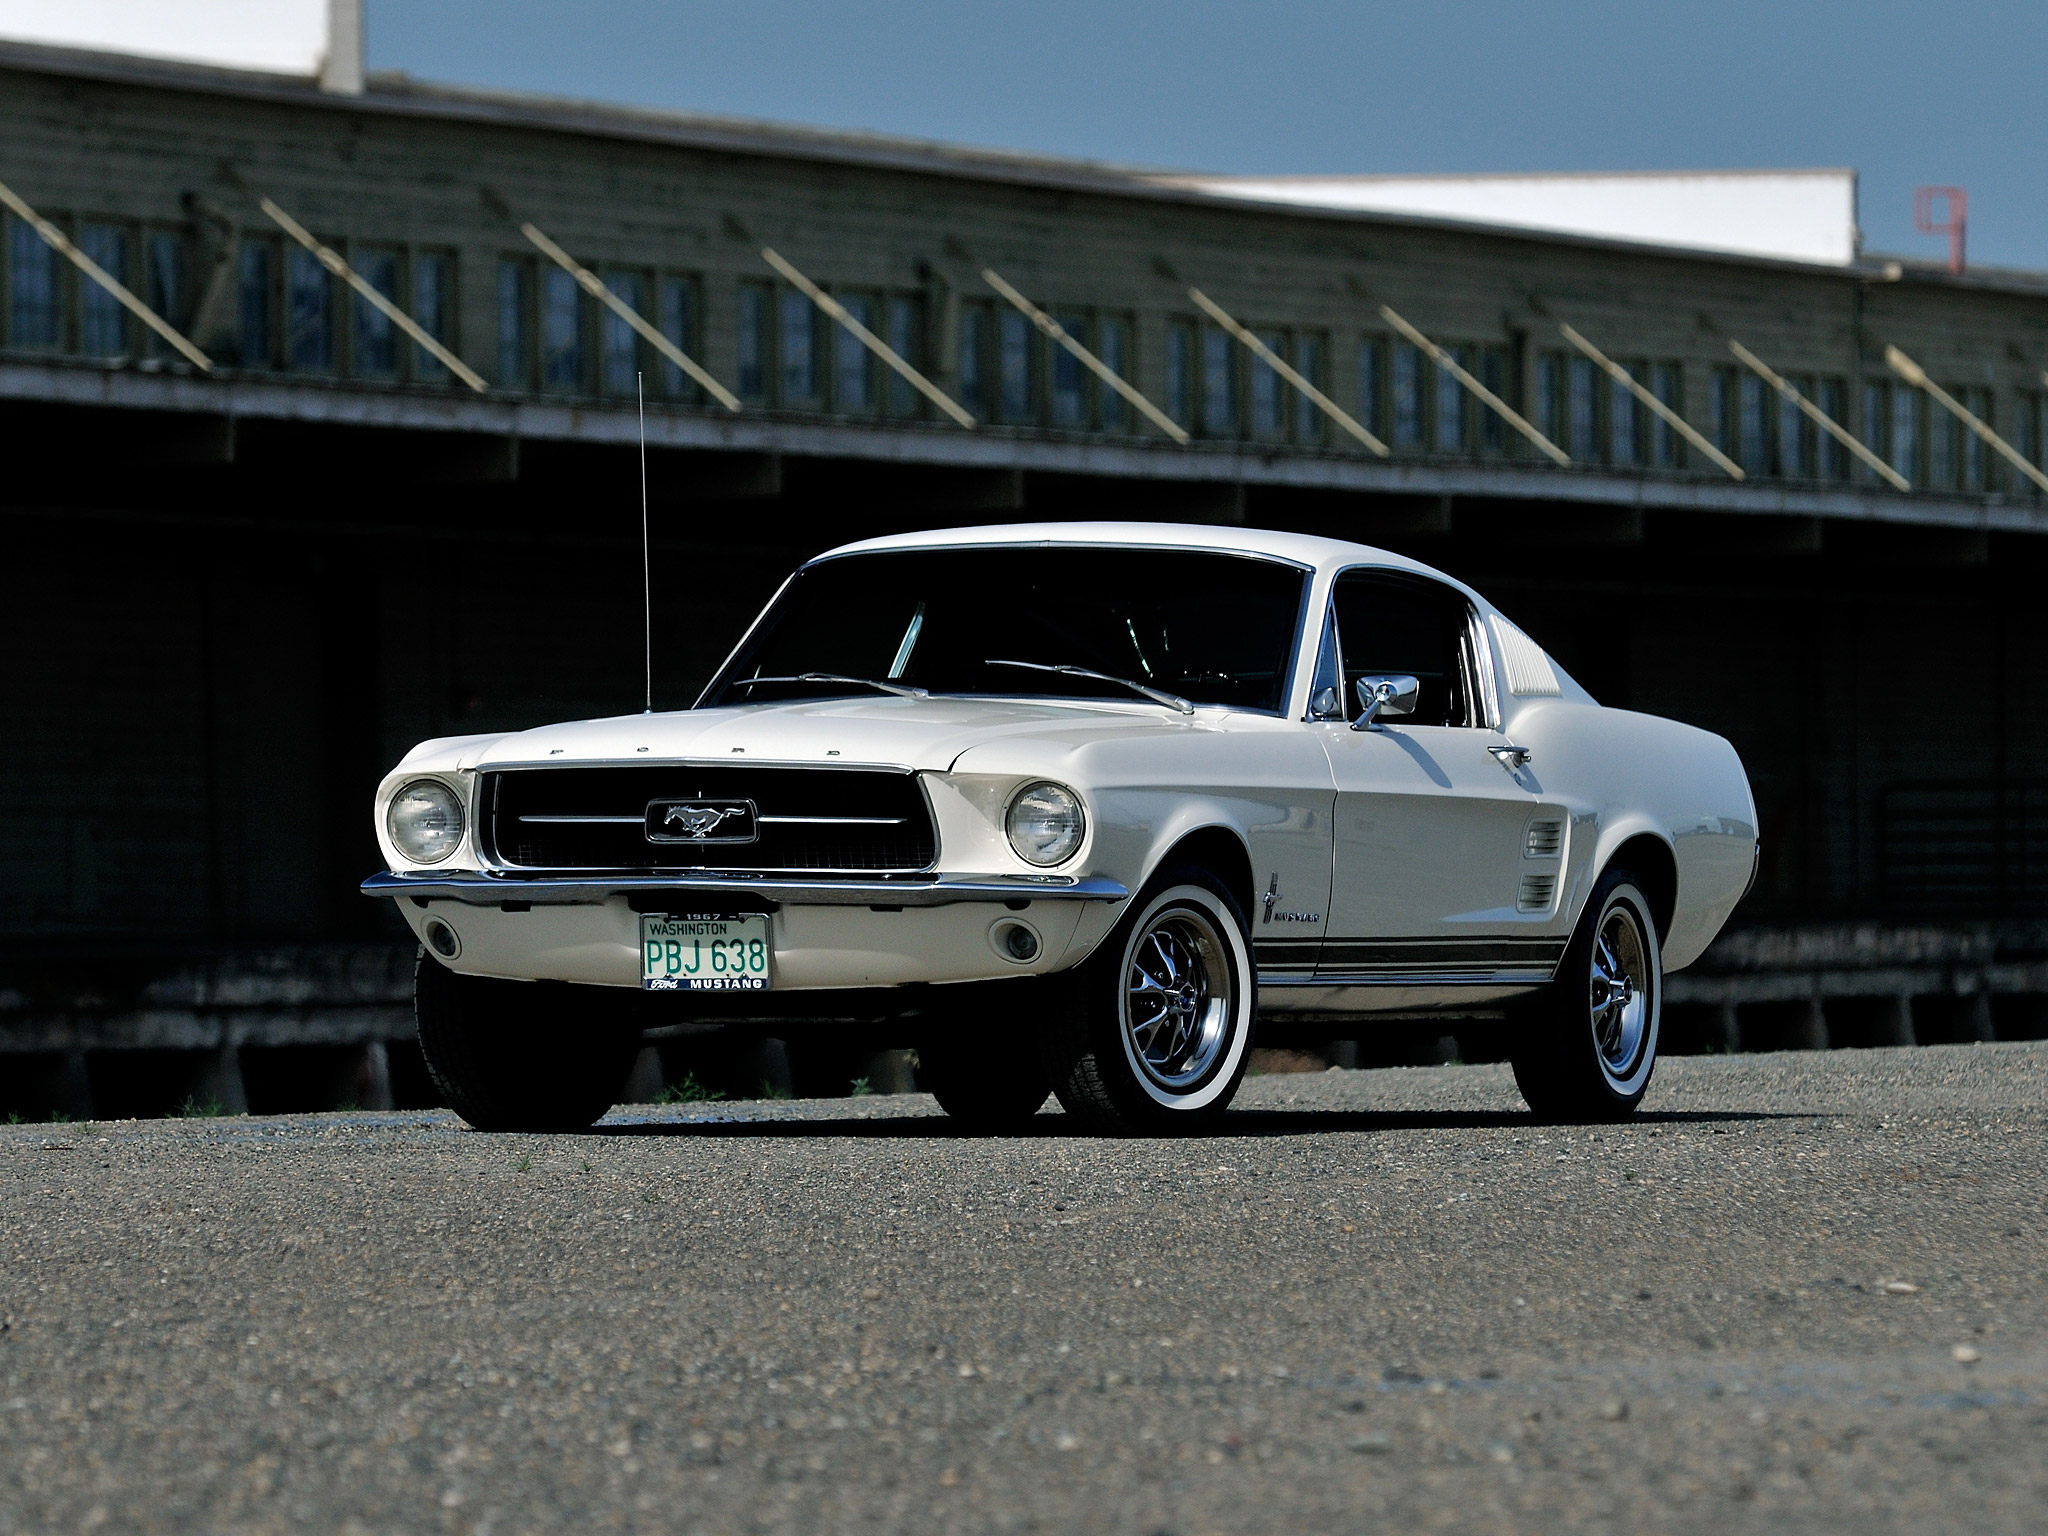 Classic Ford Mustang Wallpapers